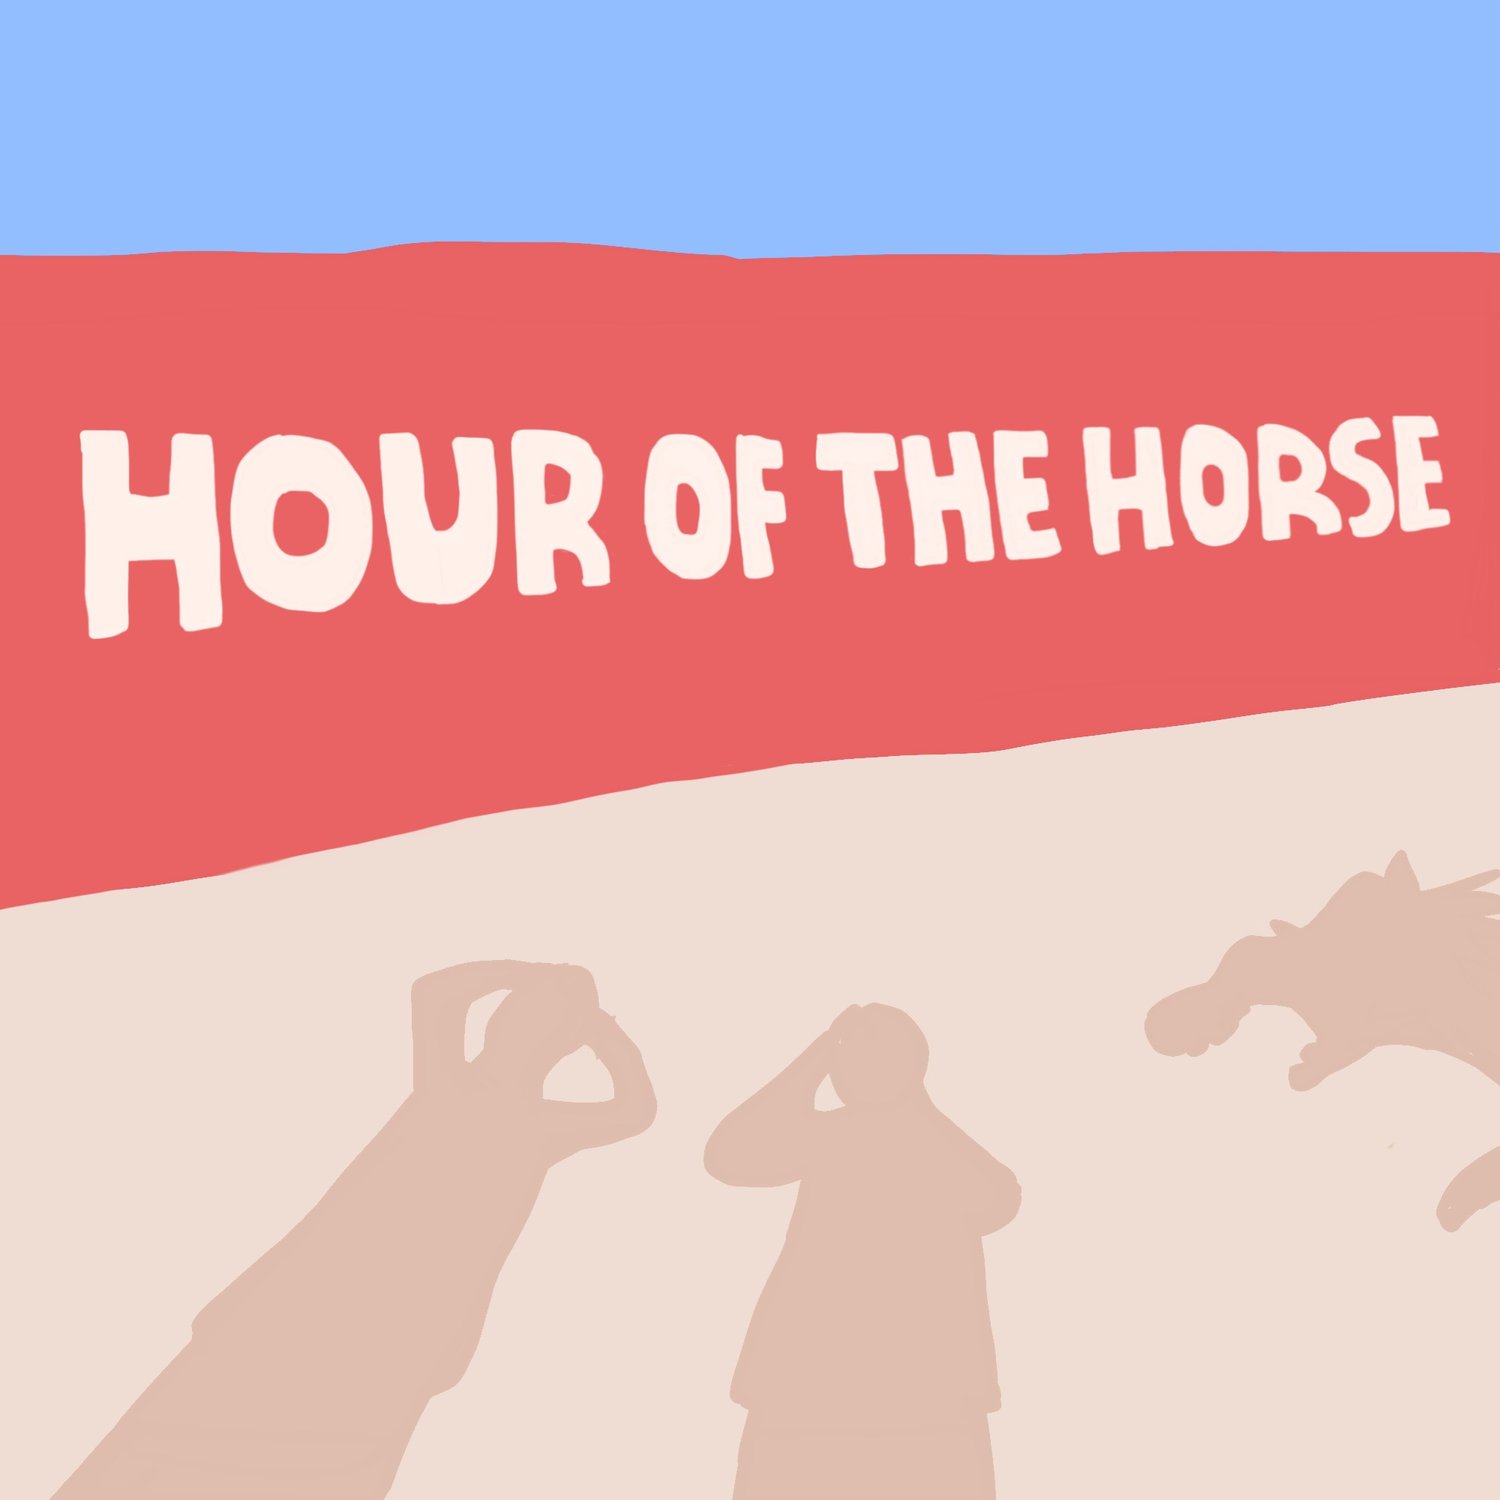 Project A+ Presents: Hour of the Horse